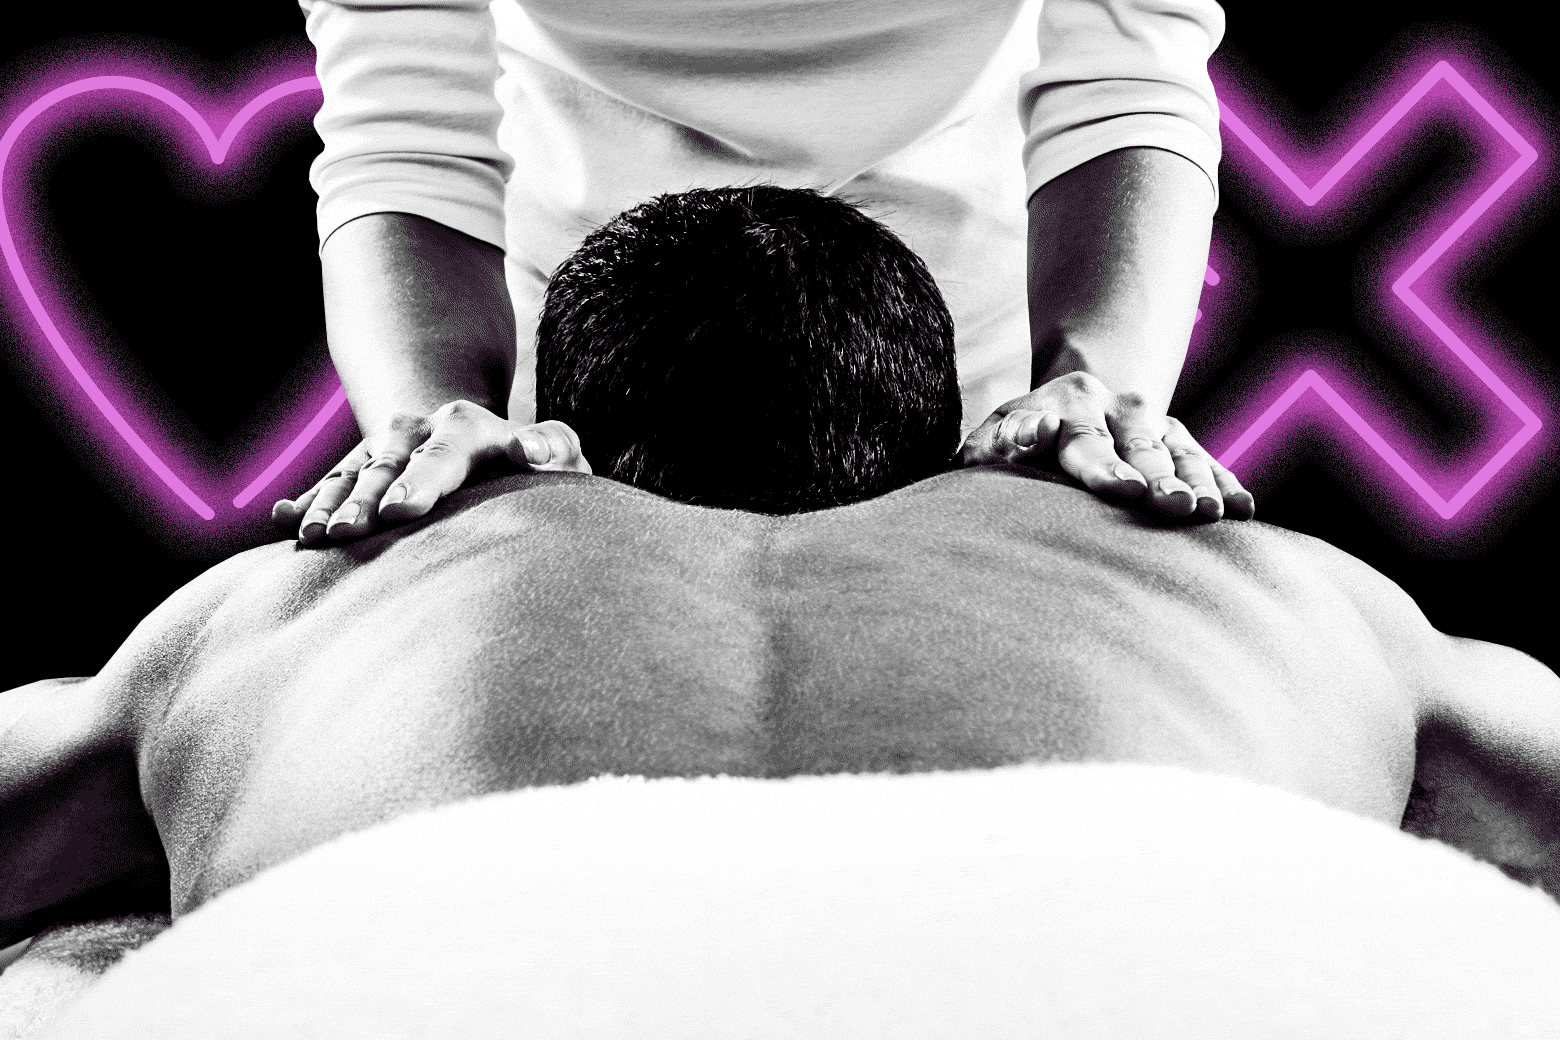 Massage Techniques For Foot Pain - My wife shut down our sex lifeâ€”is it wrong I go to massage ...